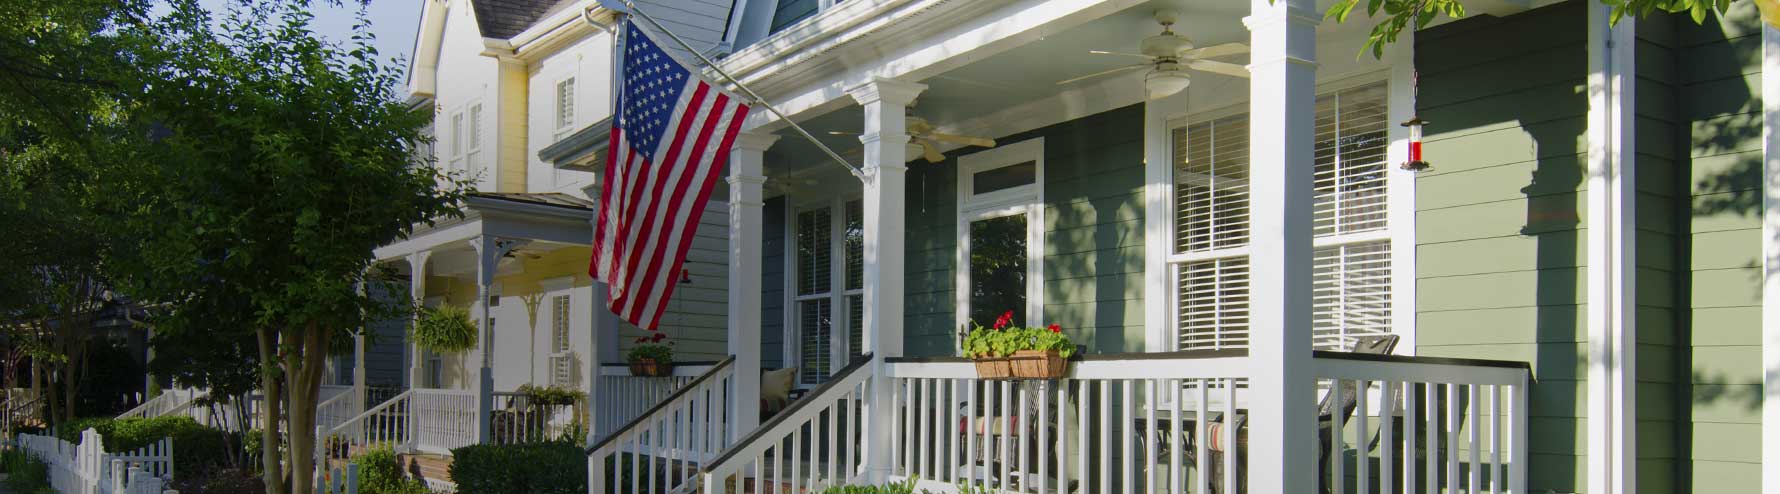 Front porch of home with American flag displayed